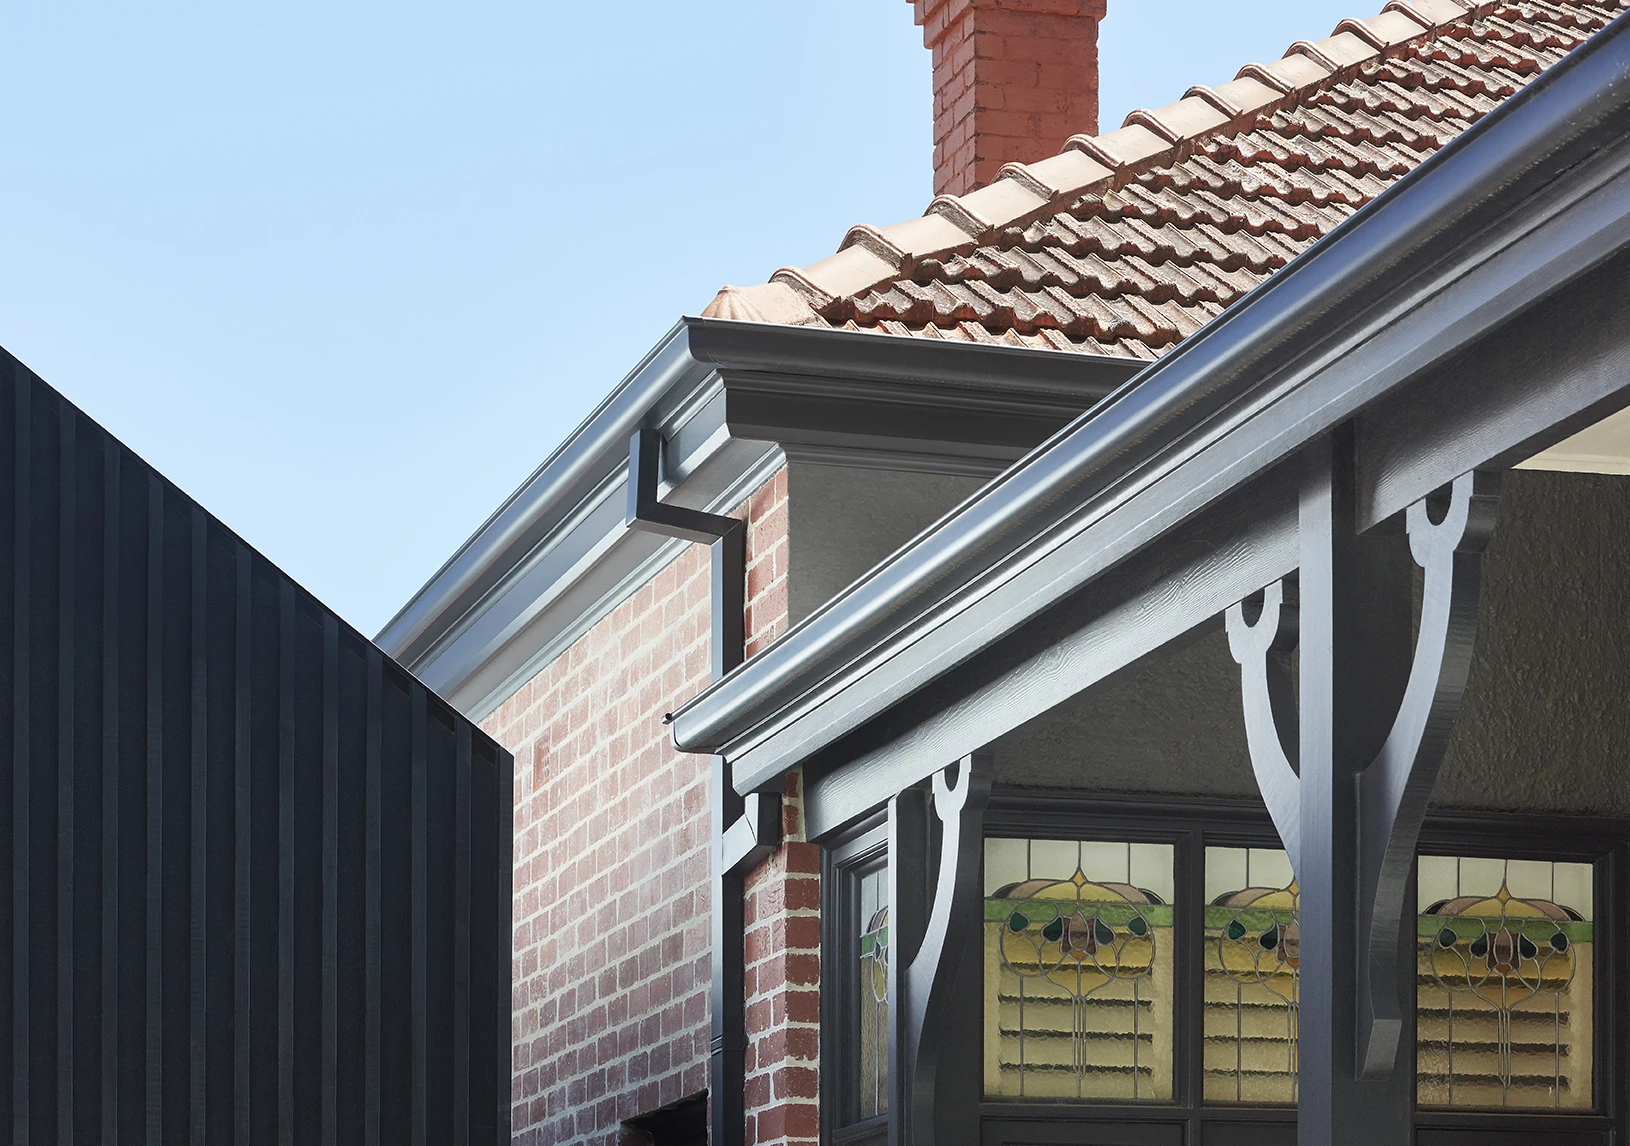 Red brick home with grey guttering and trim